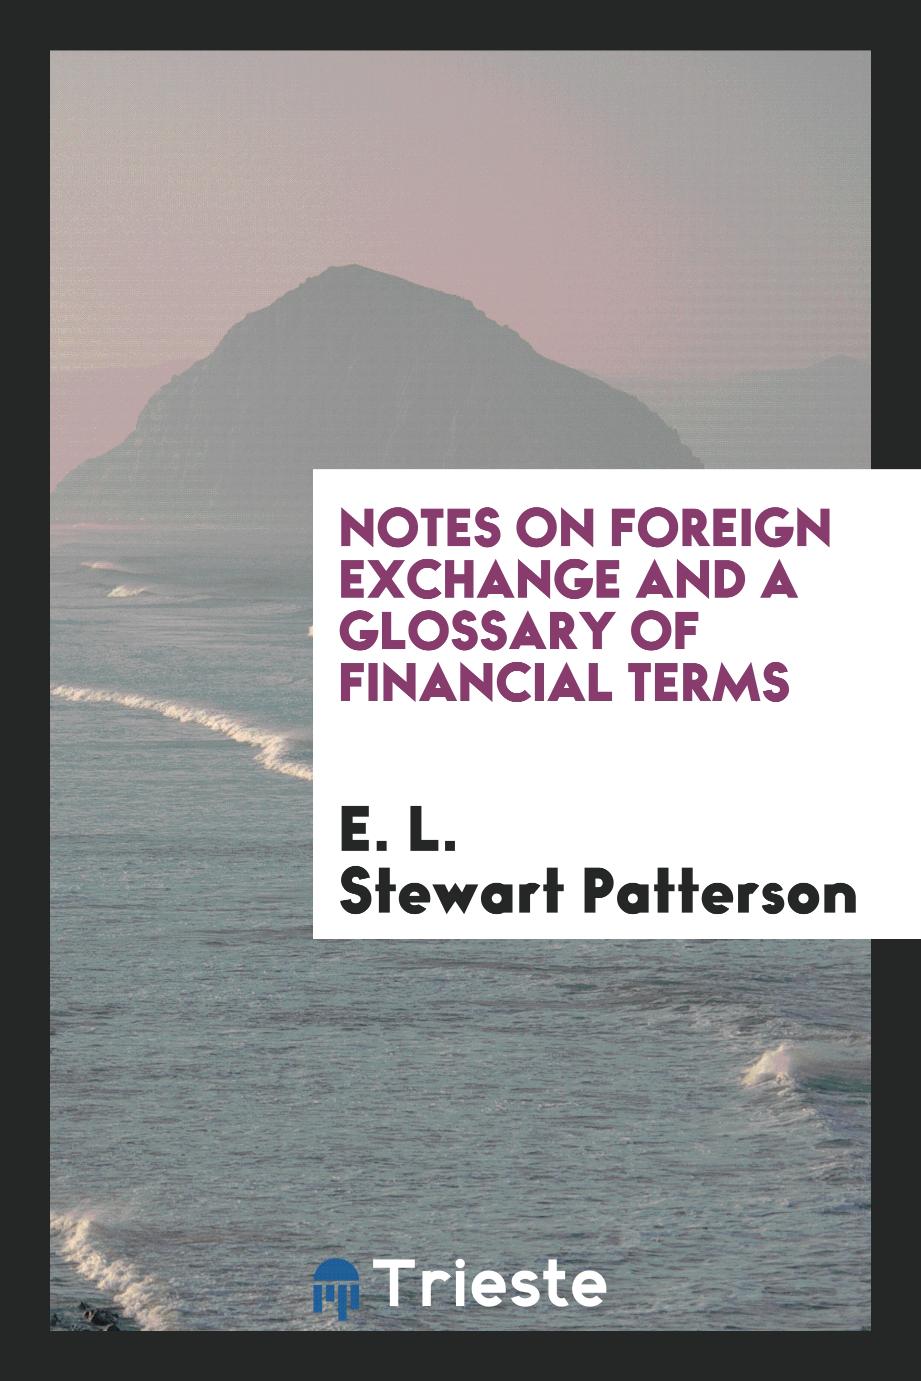 Notes on foreign exchange and a glossary of financial terms